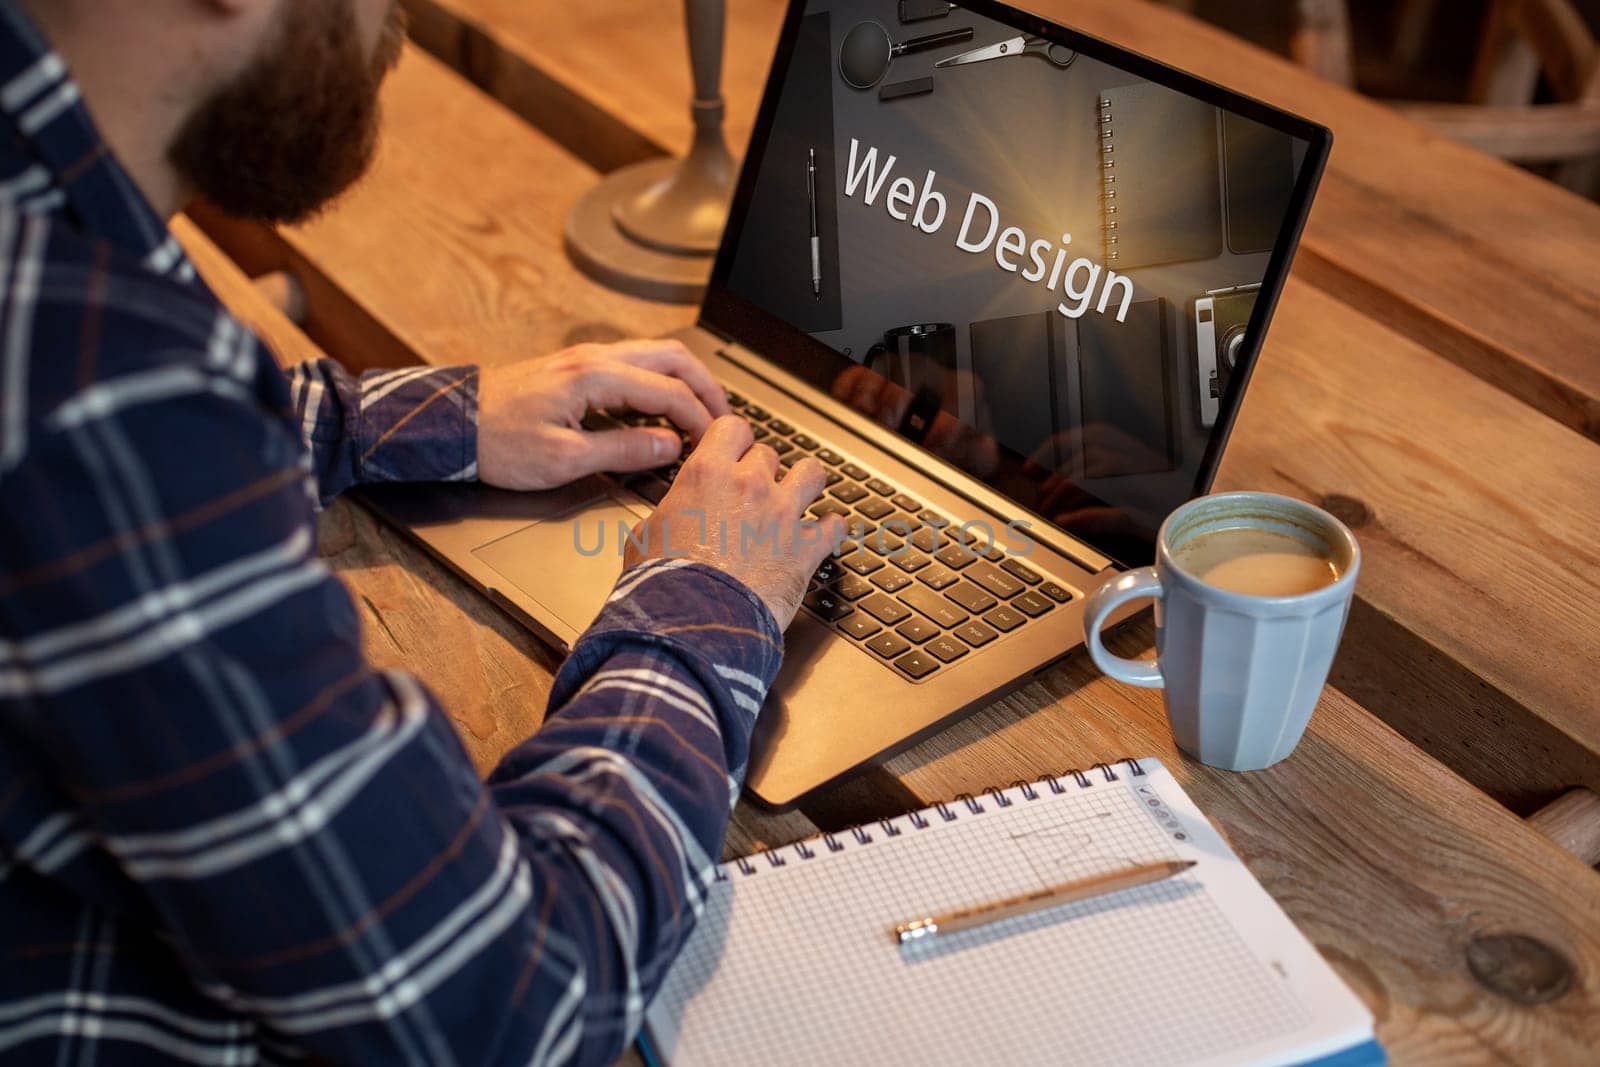 Cropped image of a young man working on his laptop in a coffee shop, rear view of business man hands busy using laptop at office desk, young male student texting on computer sitting at wooden table. Design. Web design